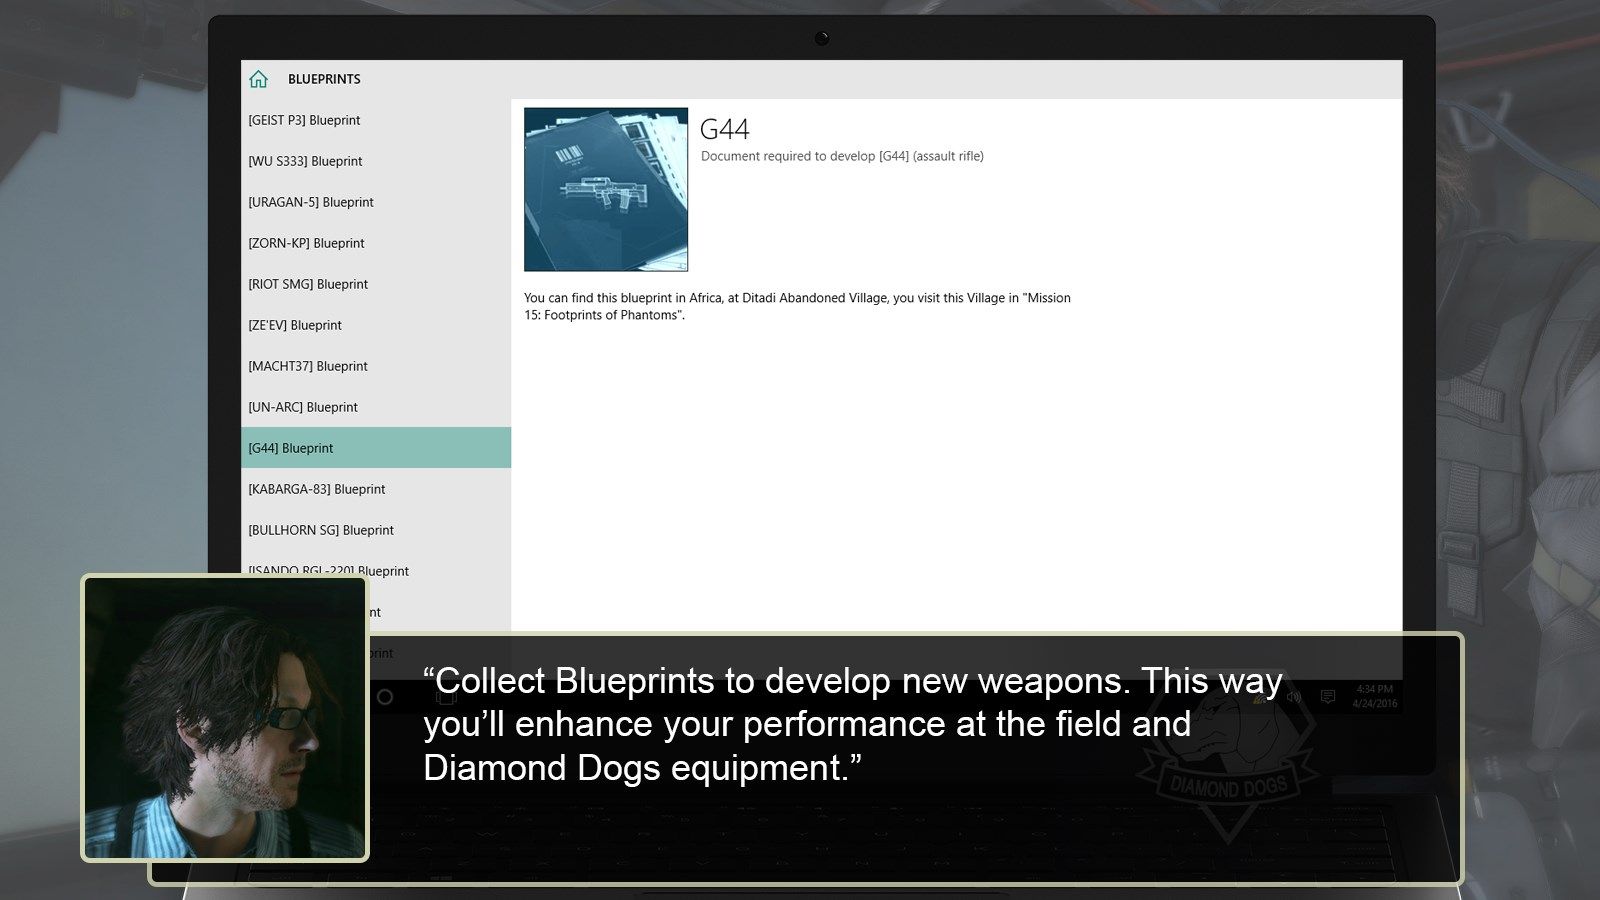 Collect Blueprints to develop new weapons. This way you'll enhance your performance at the field and Diamond Dogs equipment.